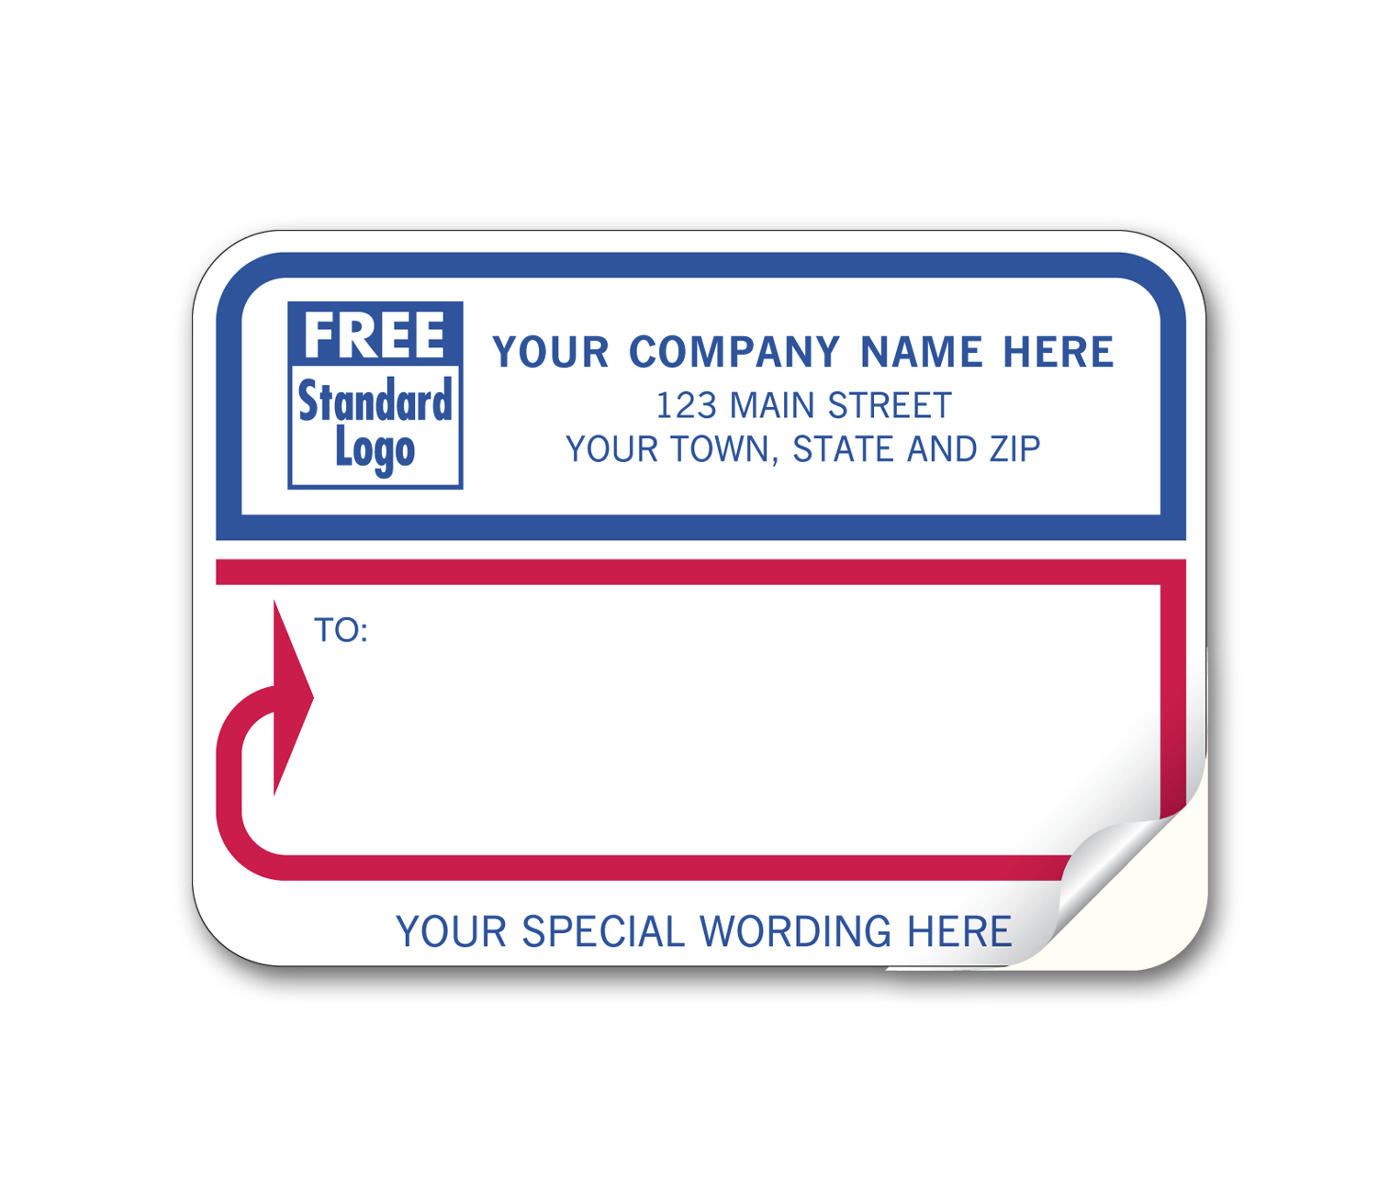 Mailing Labels, Padded, White with Blue & Red Borders